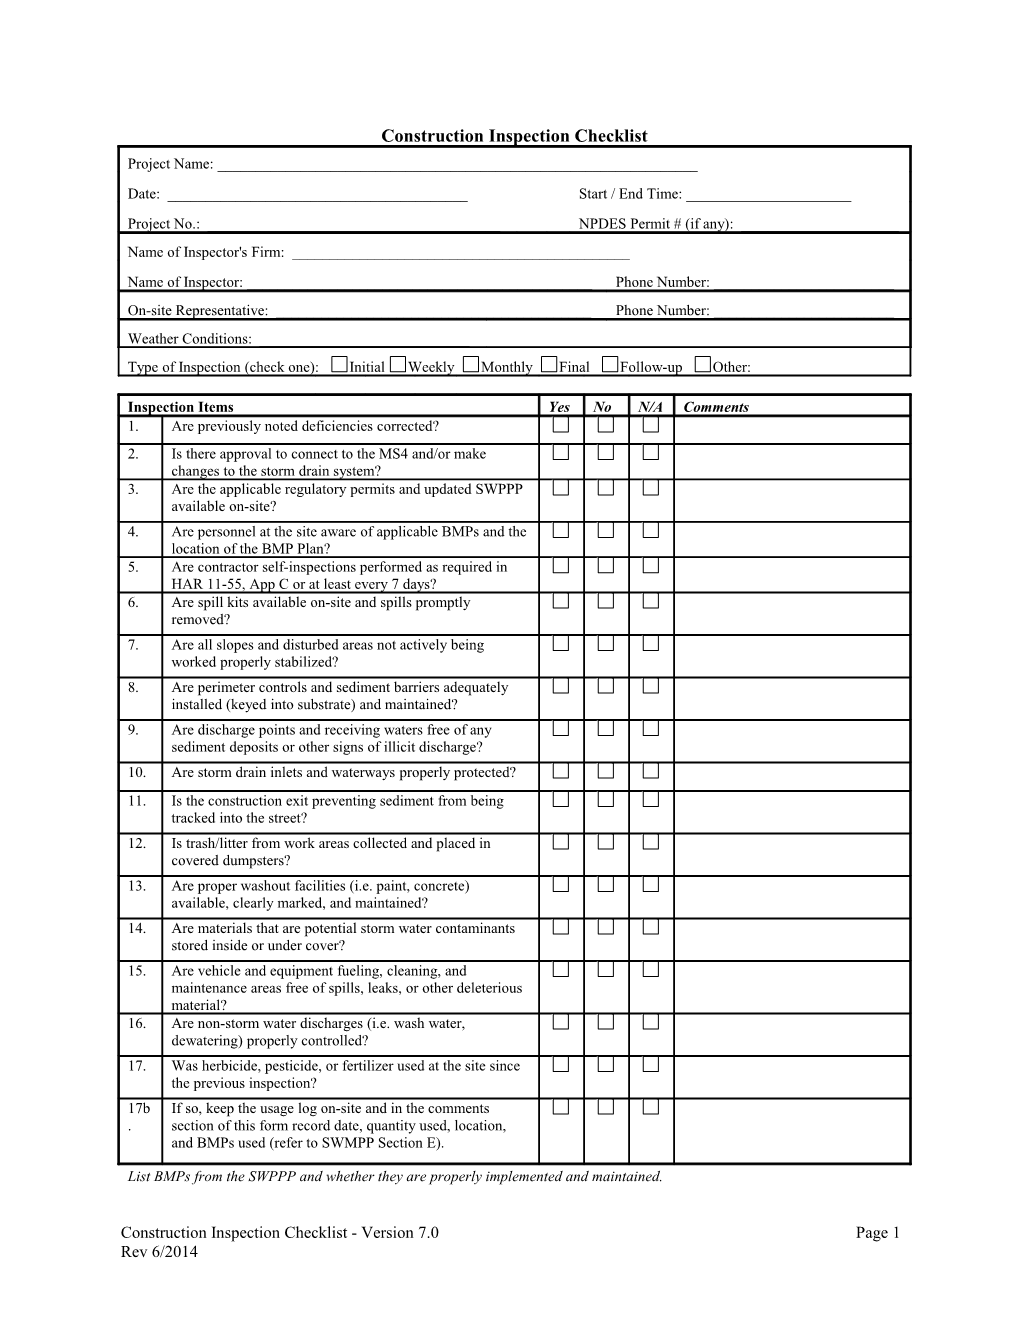 Construction Inspection Checklist - Version 7.0Page 1